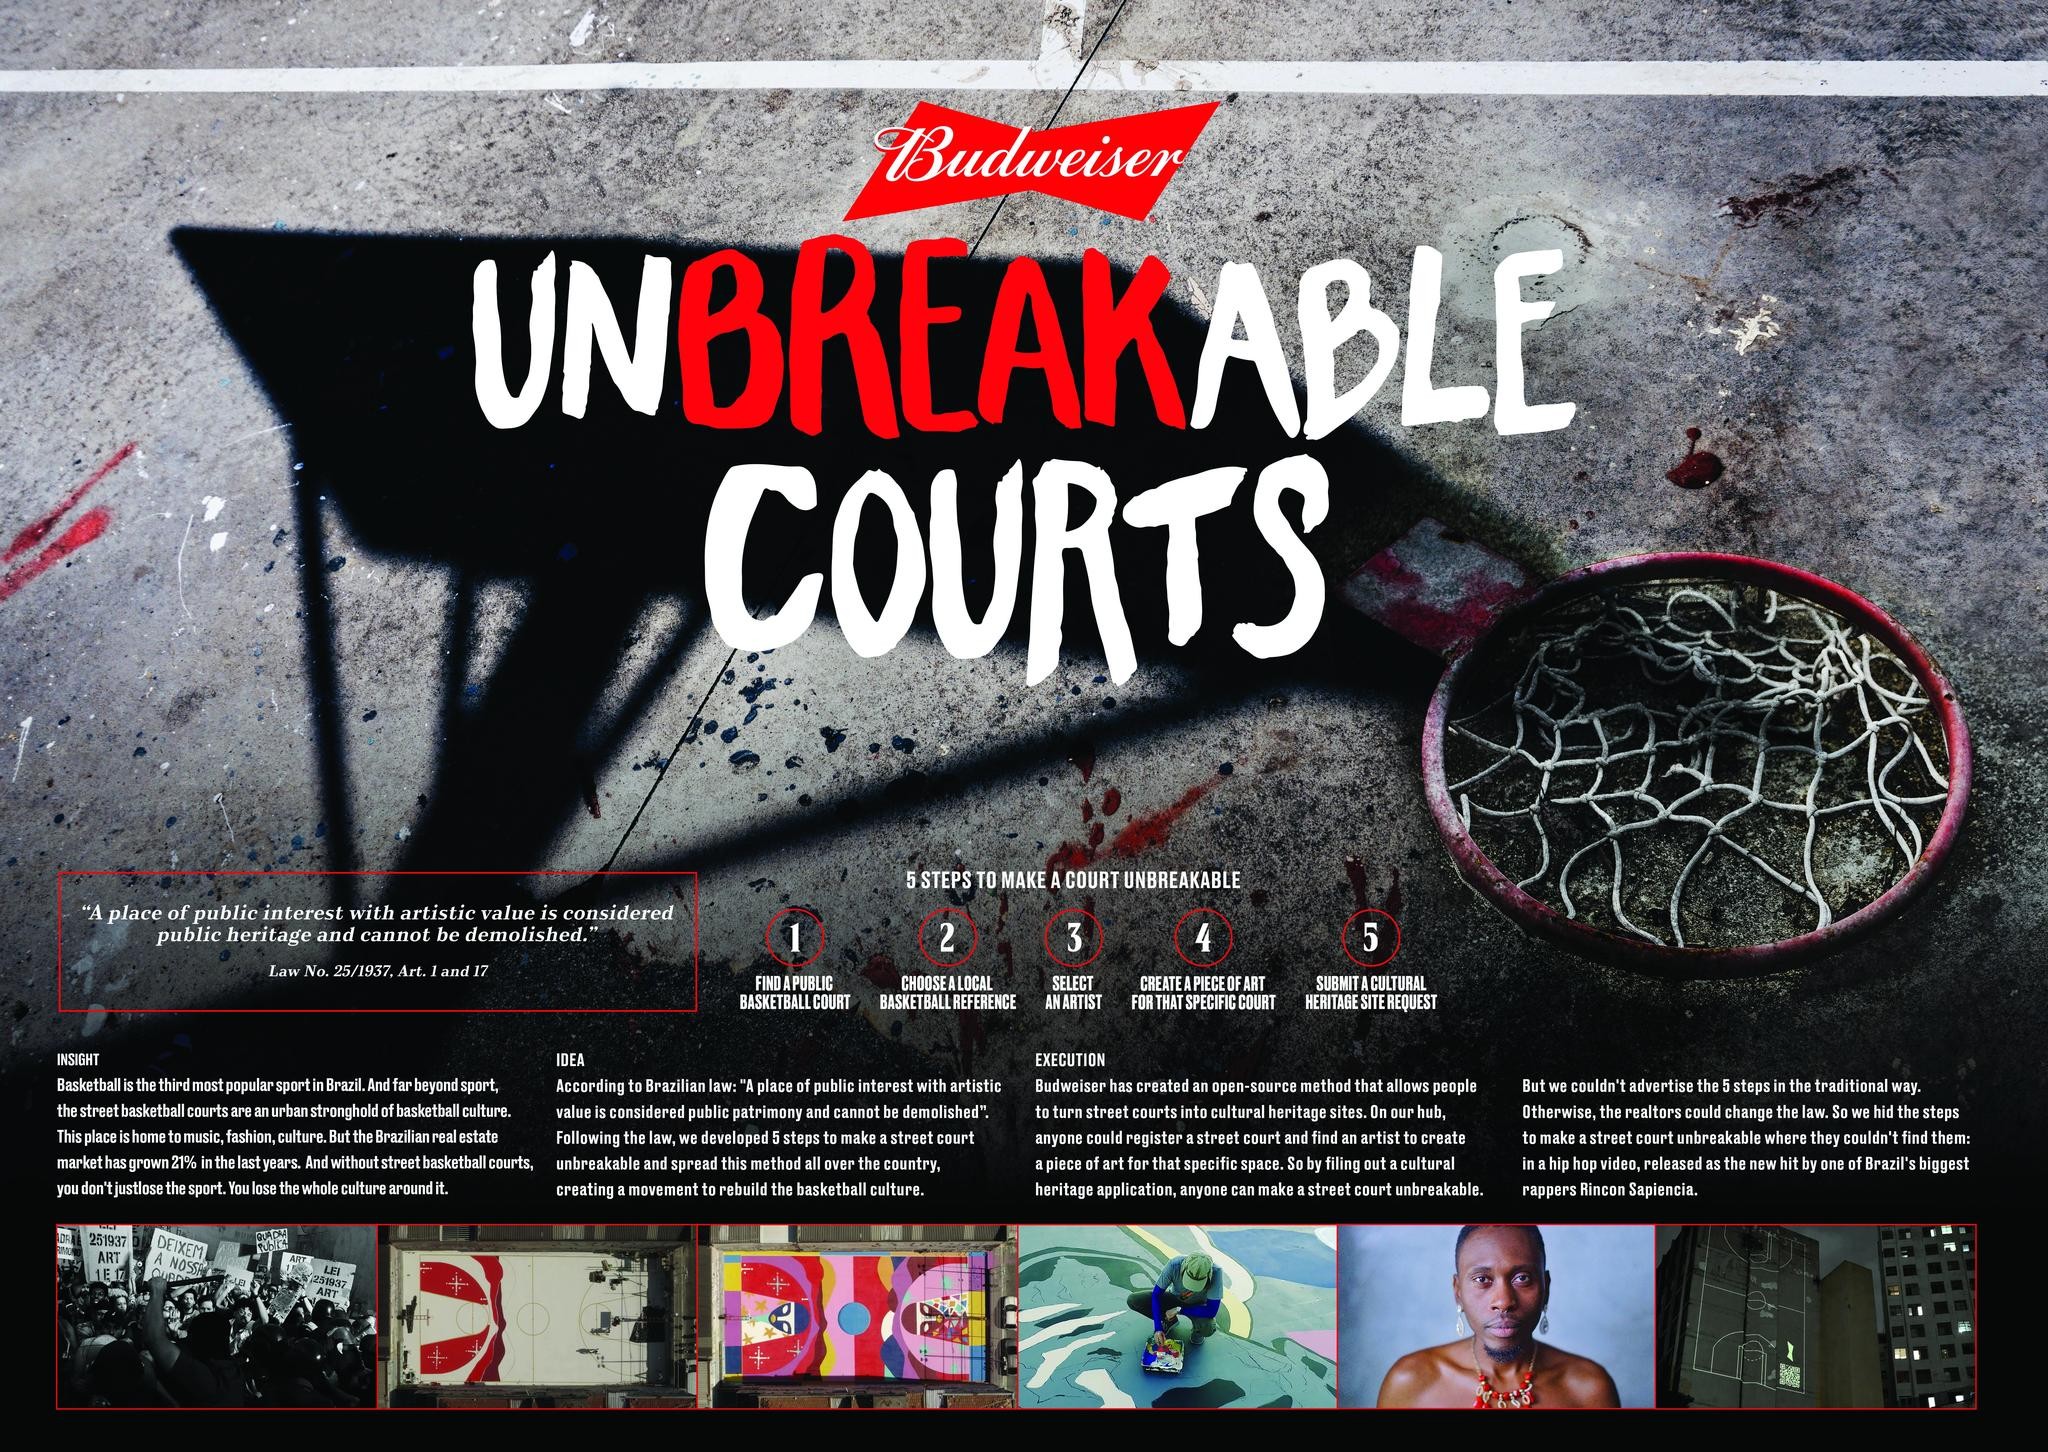 Unbreakable Courts